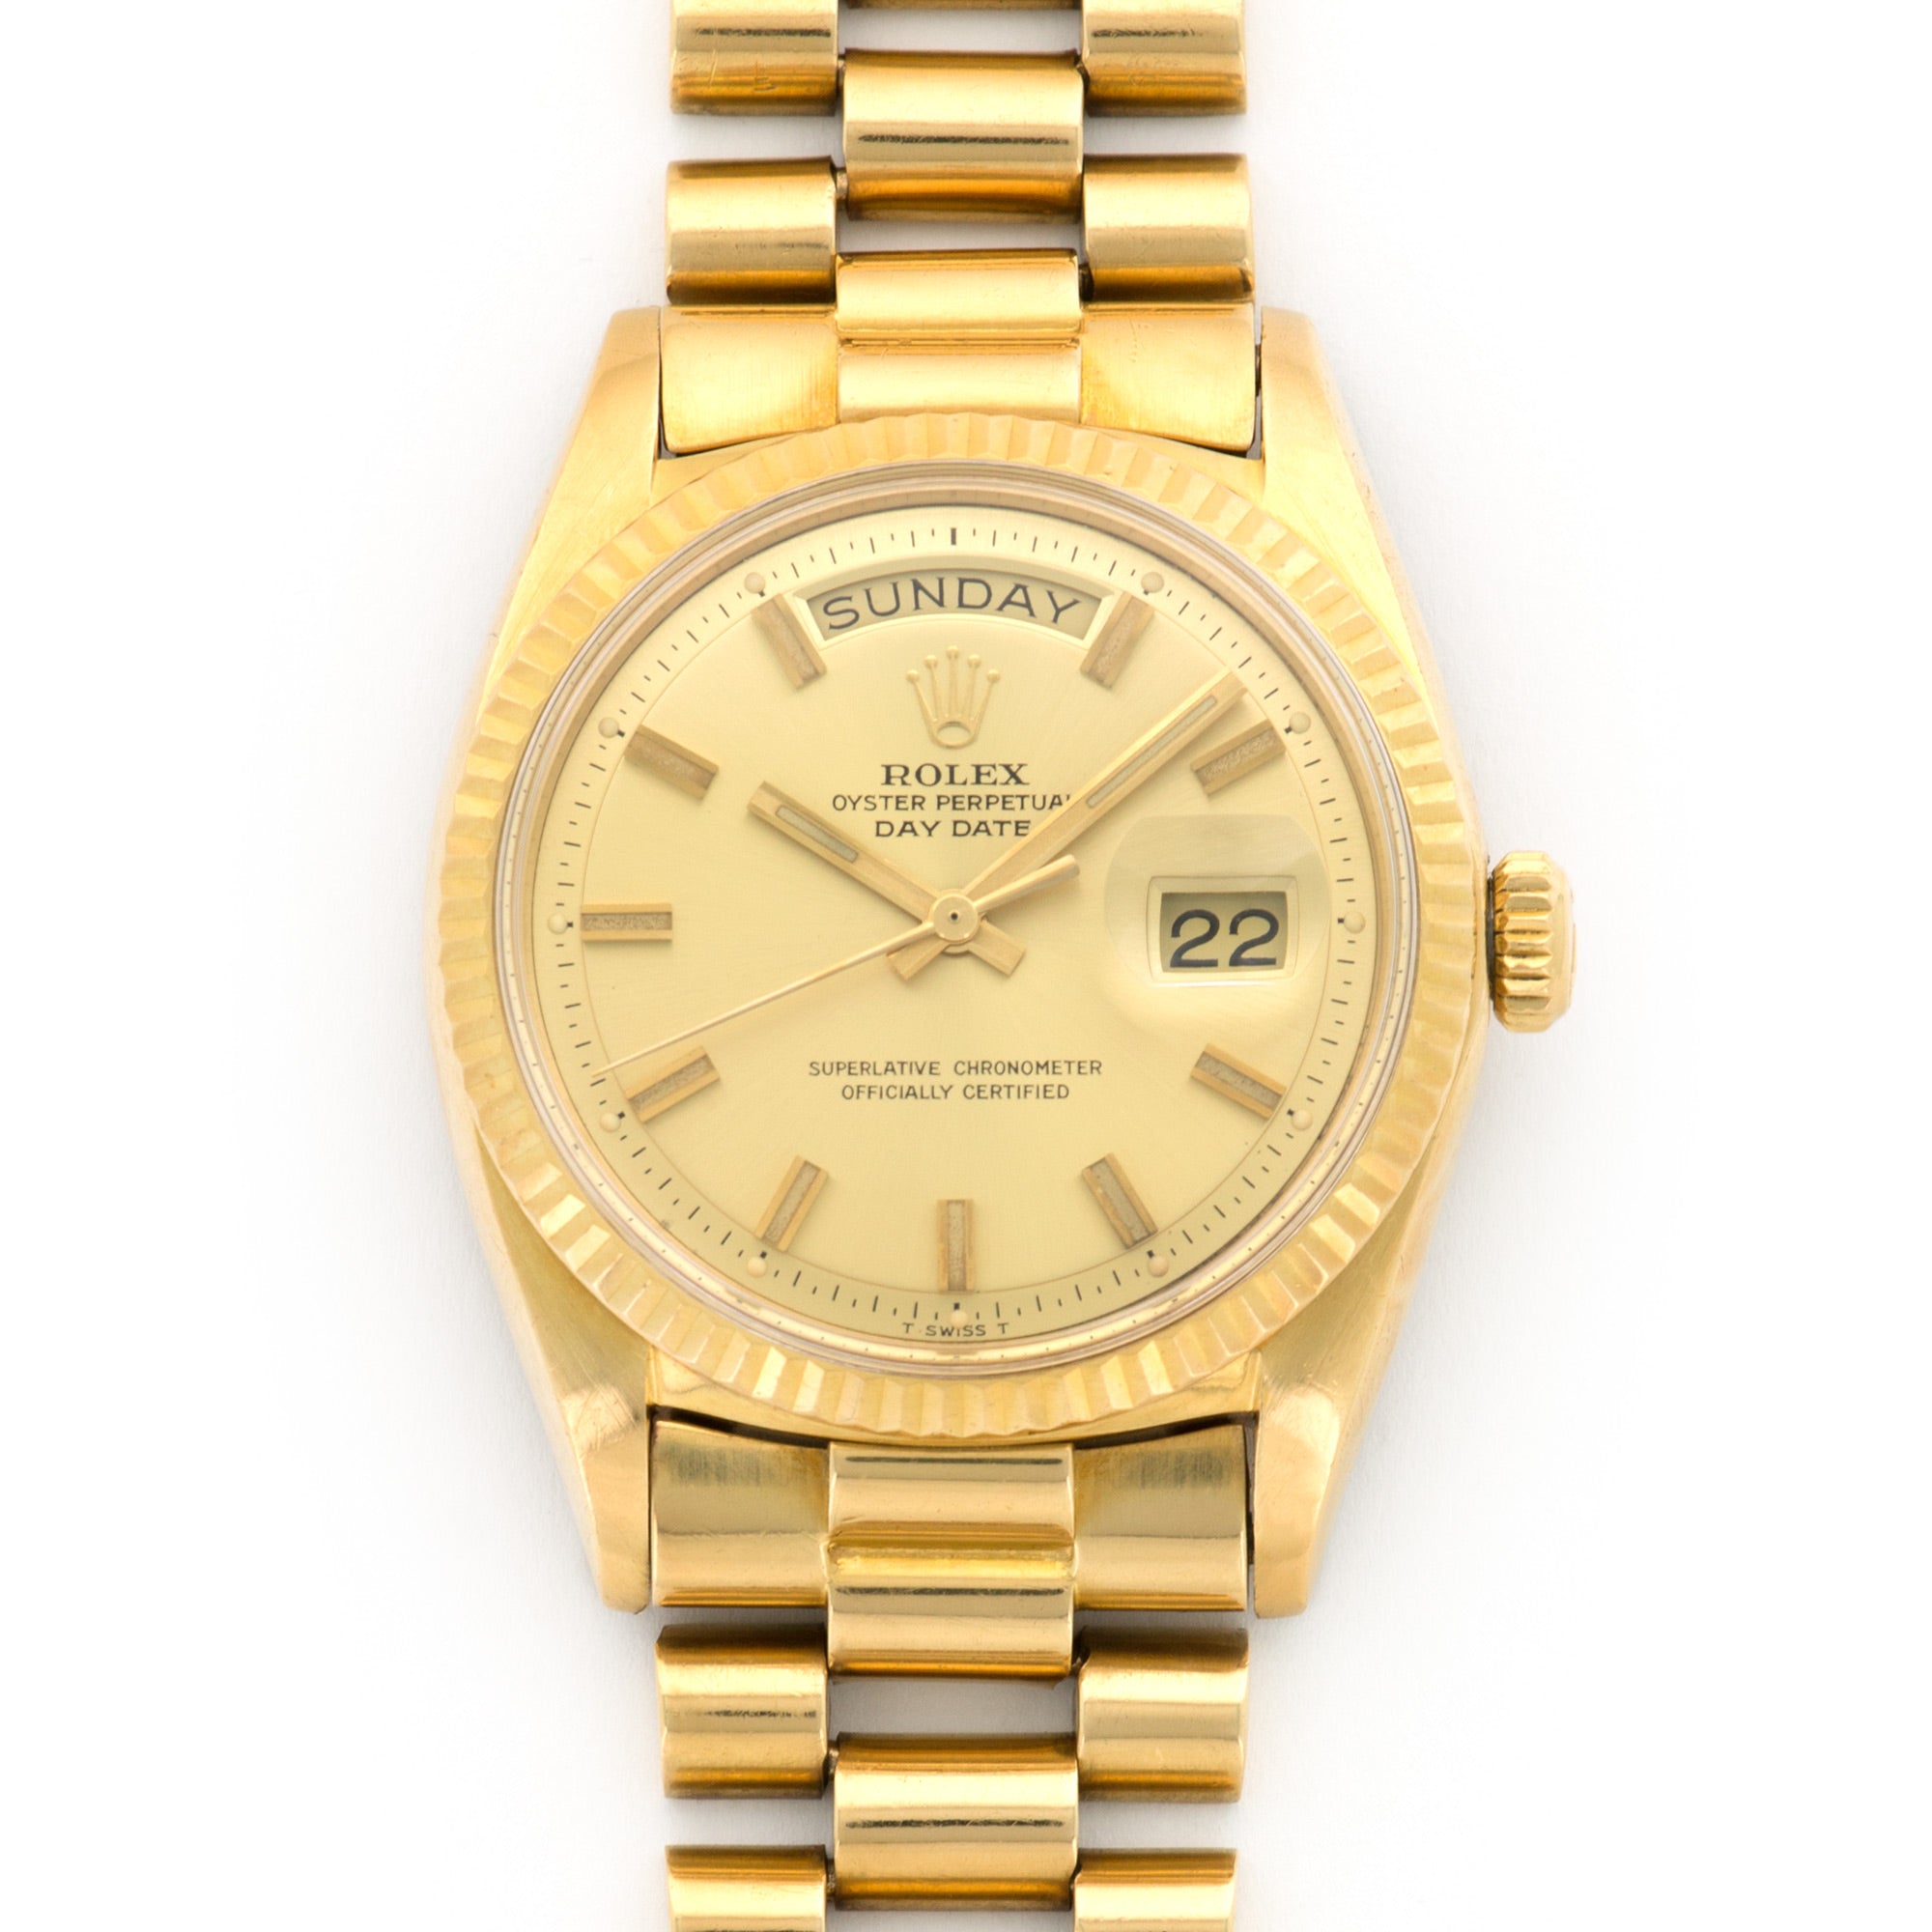 Rolex - Rolex Yellow Gold Wide Boy Day-Date Watch Ref. 1803 with Original Box and Papers - The Keystone Watches